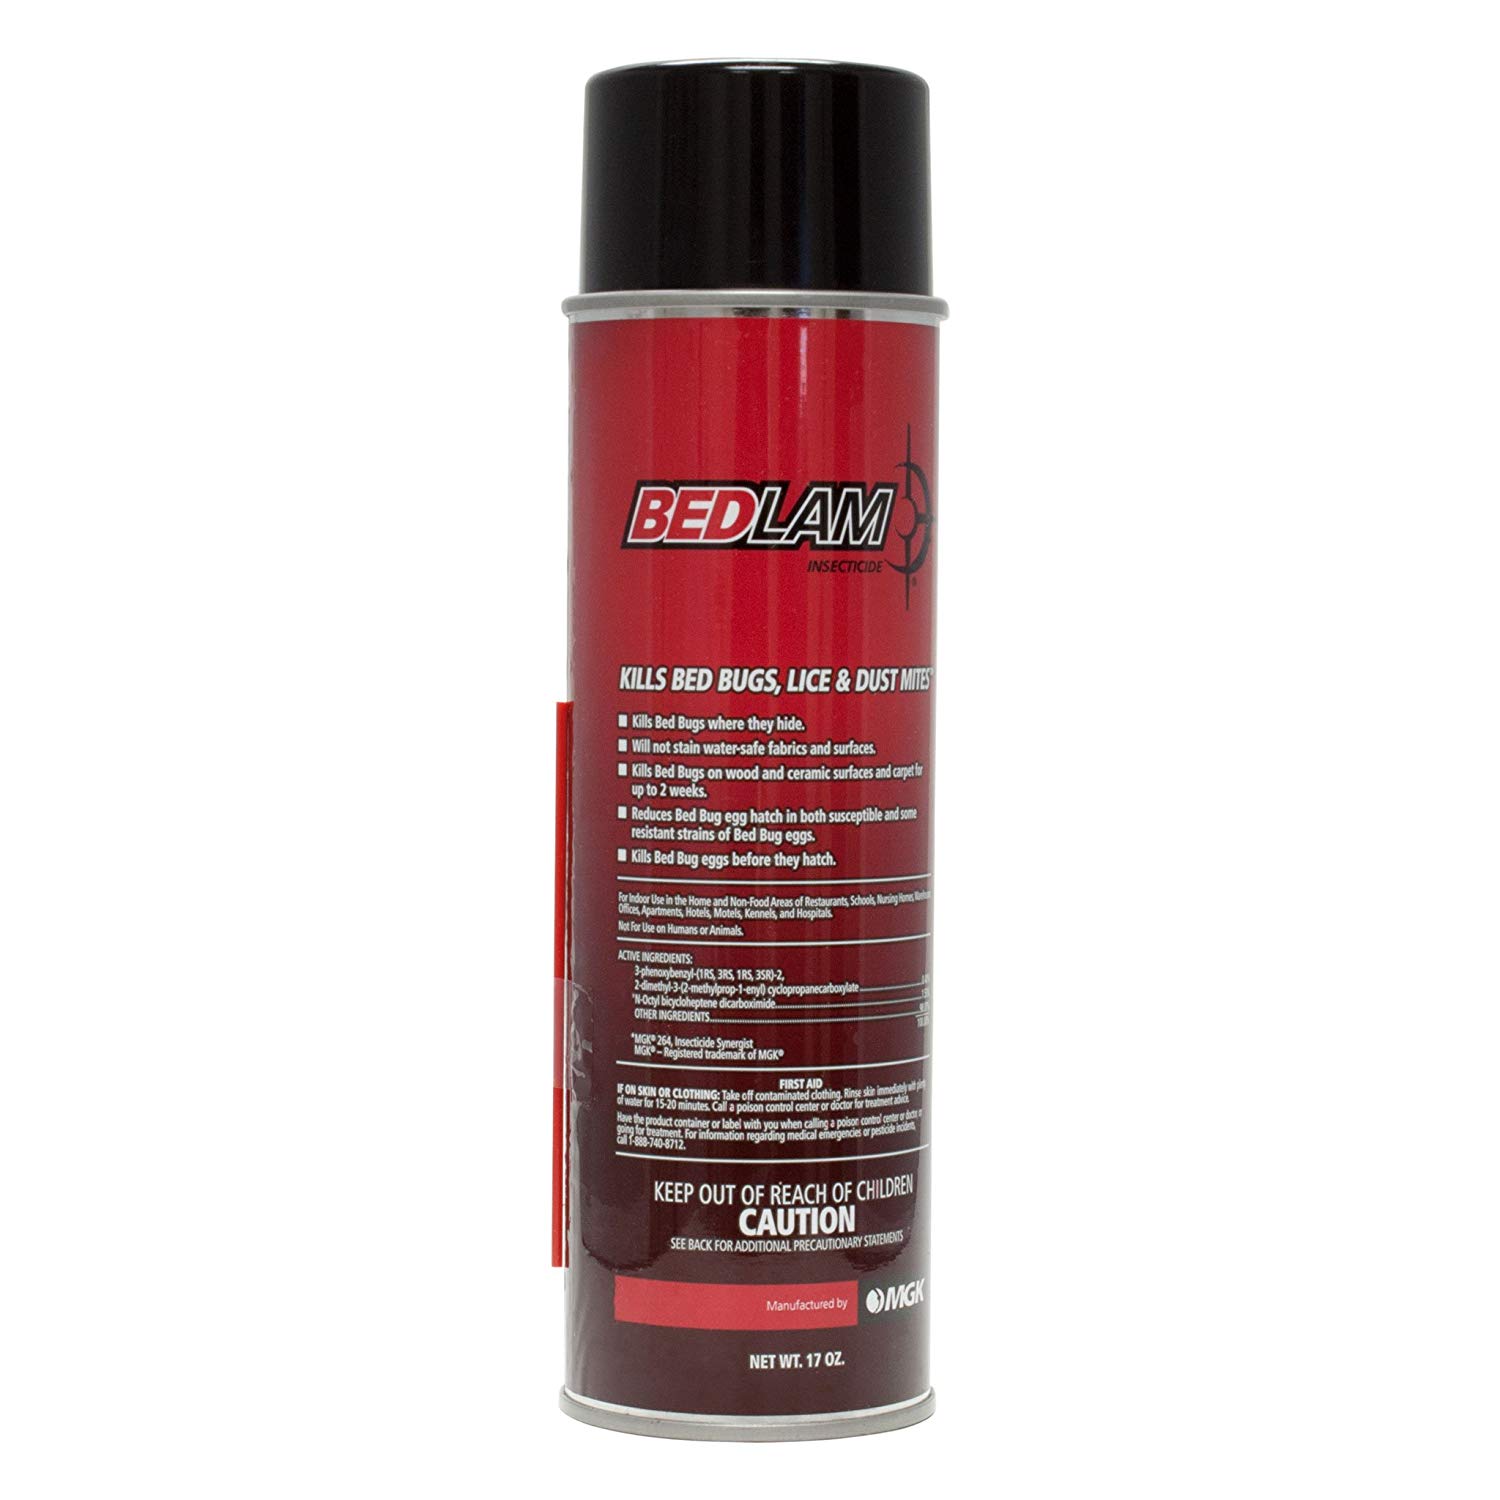 Bedlam Insecticide Spray - Kills Bed Bugs, Lice, and Dust Mites (17 oz)